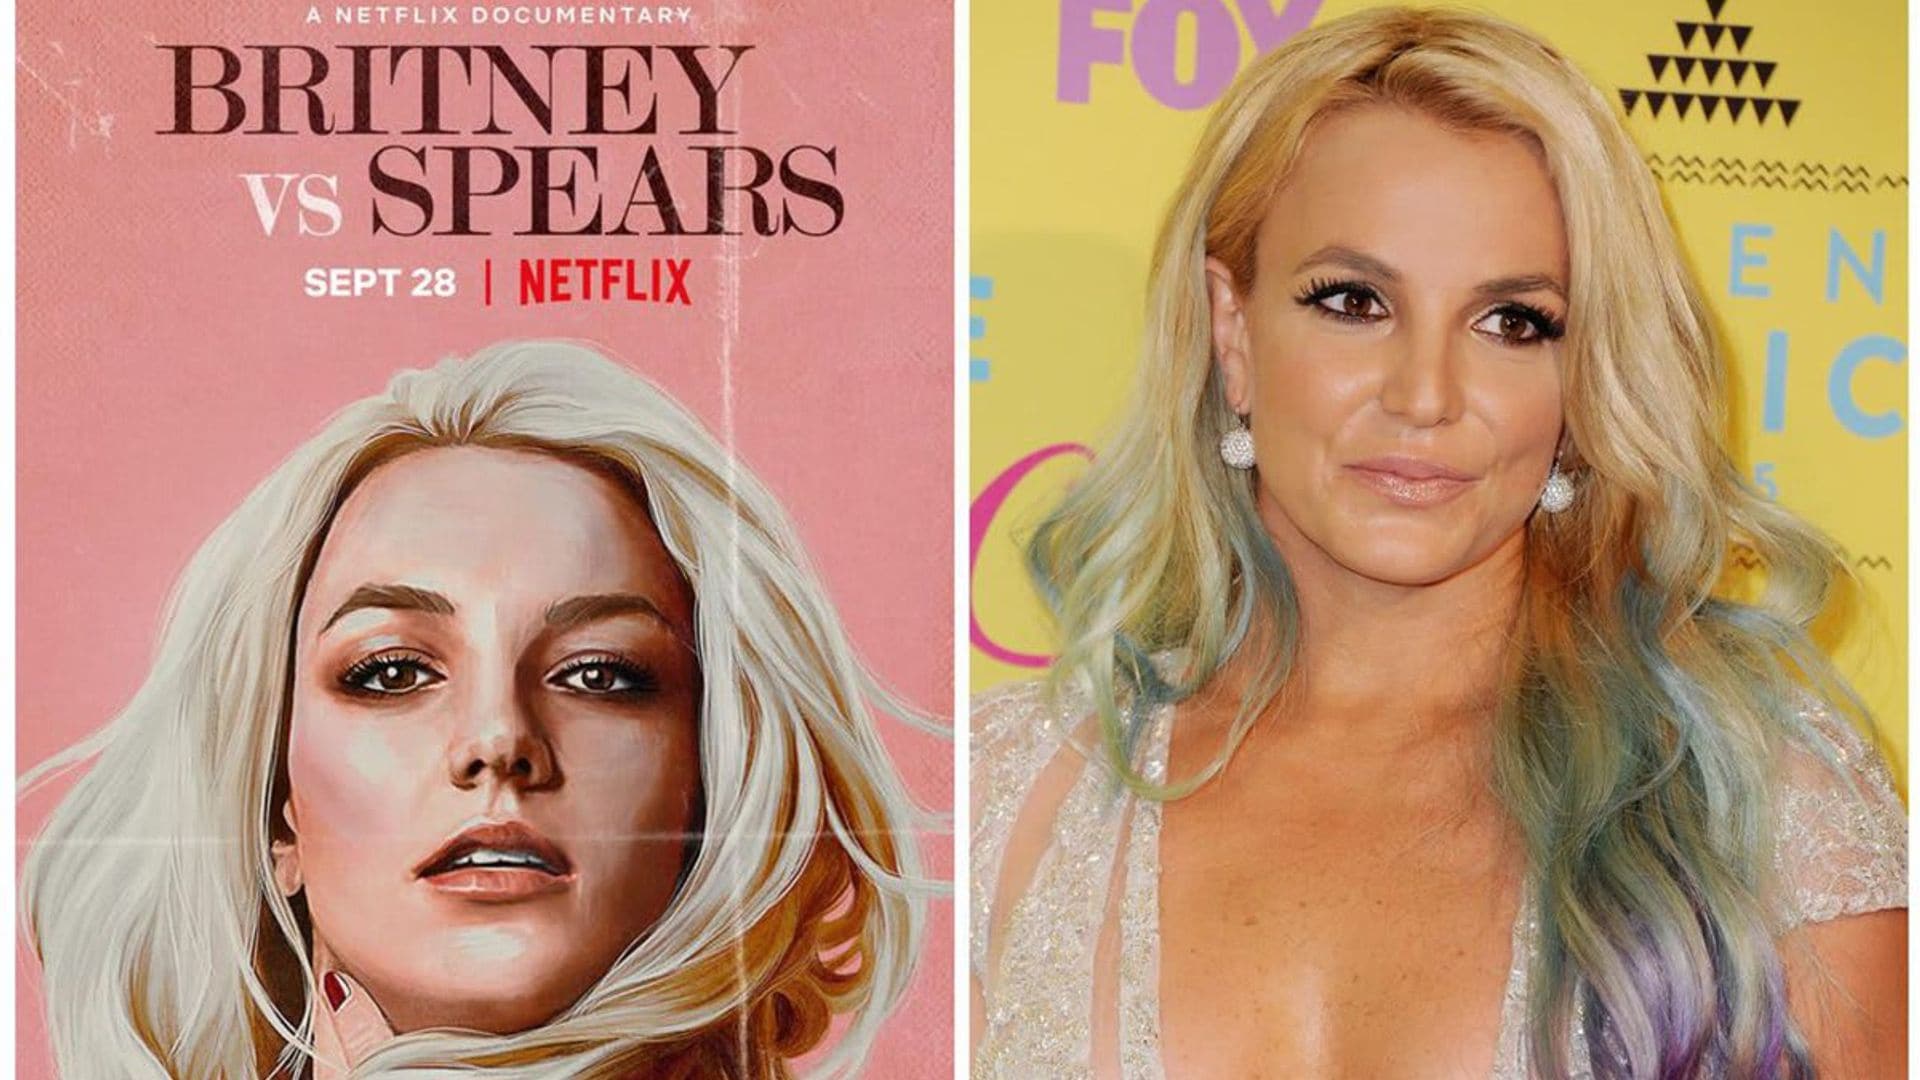 New trailer: Netflix announces upcoming Britney Spears documentary